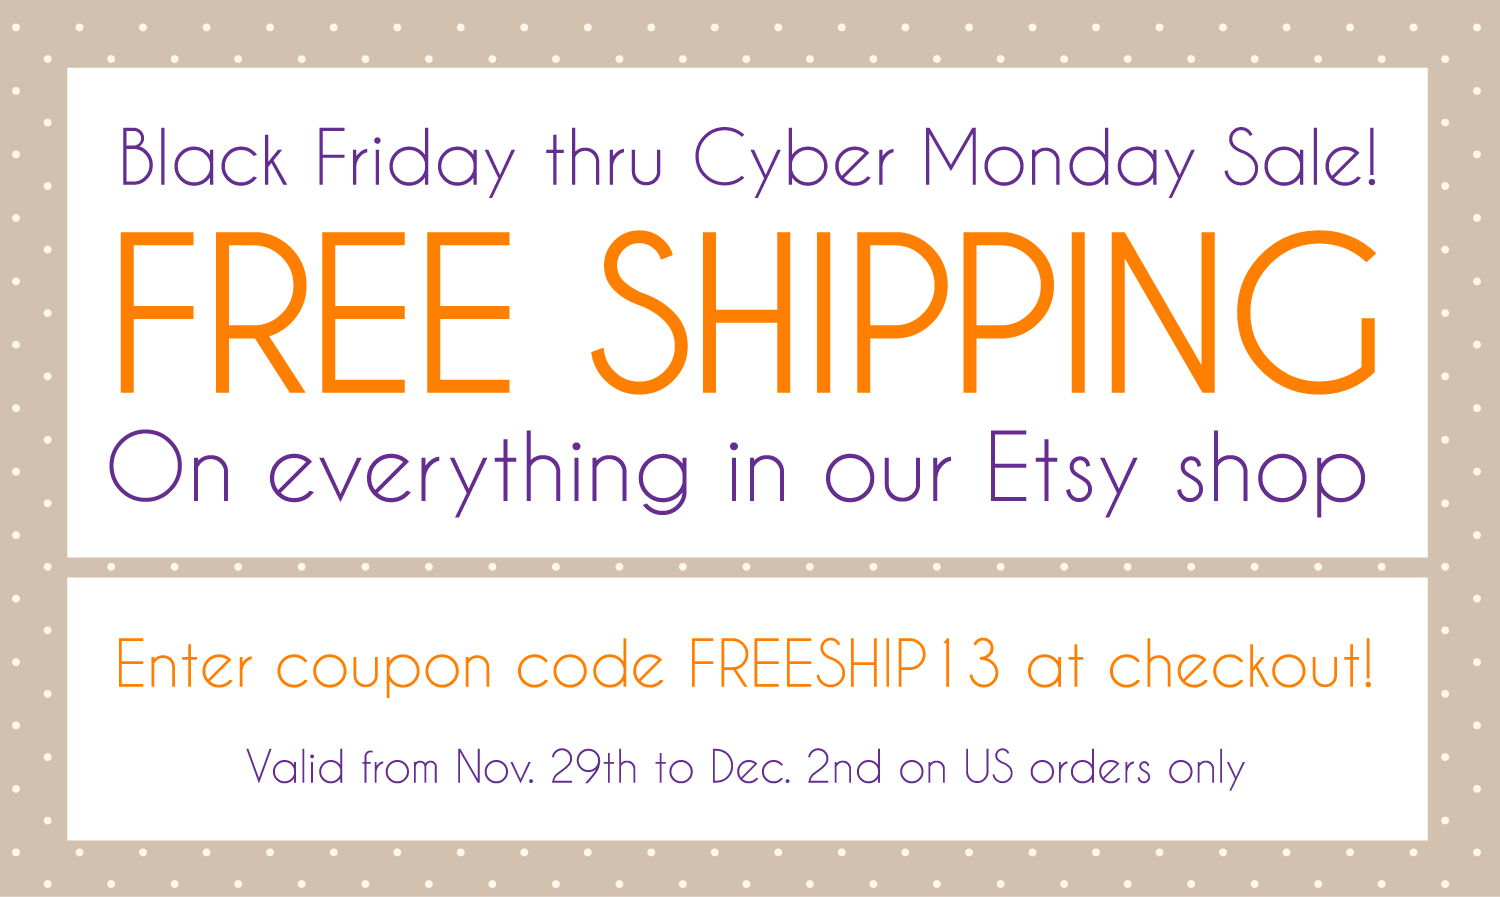 Is there a code for free shipping at Etsy?